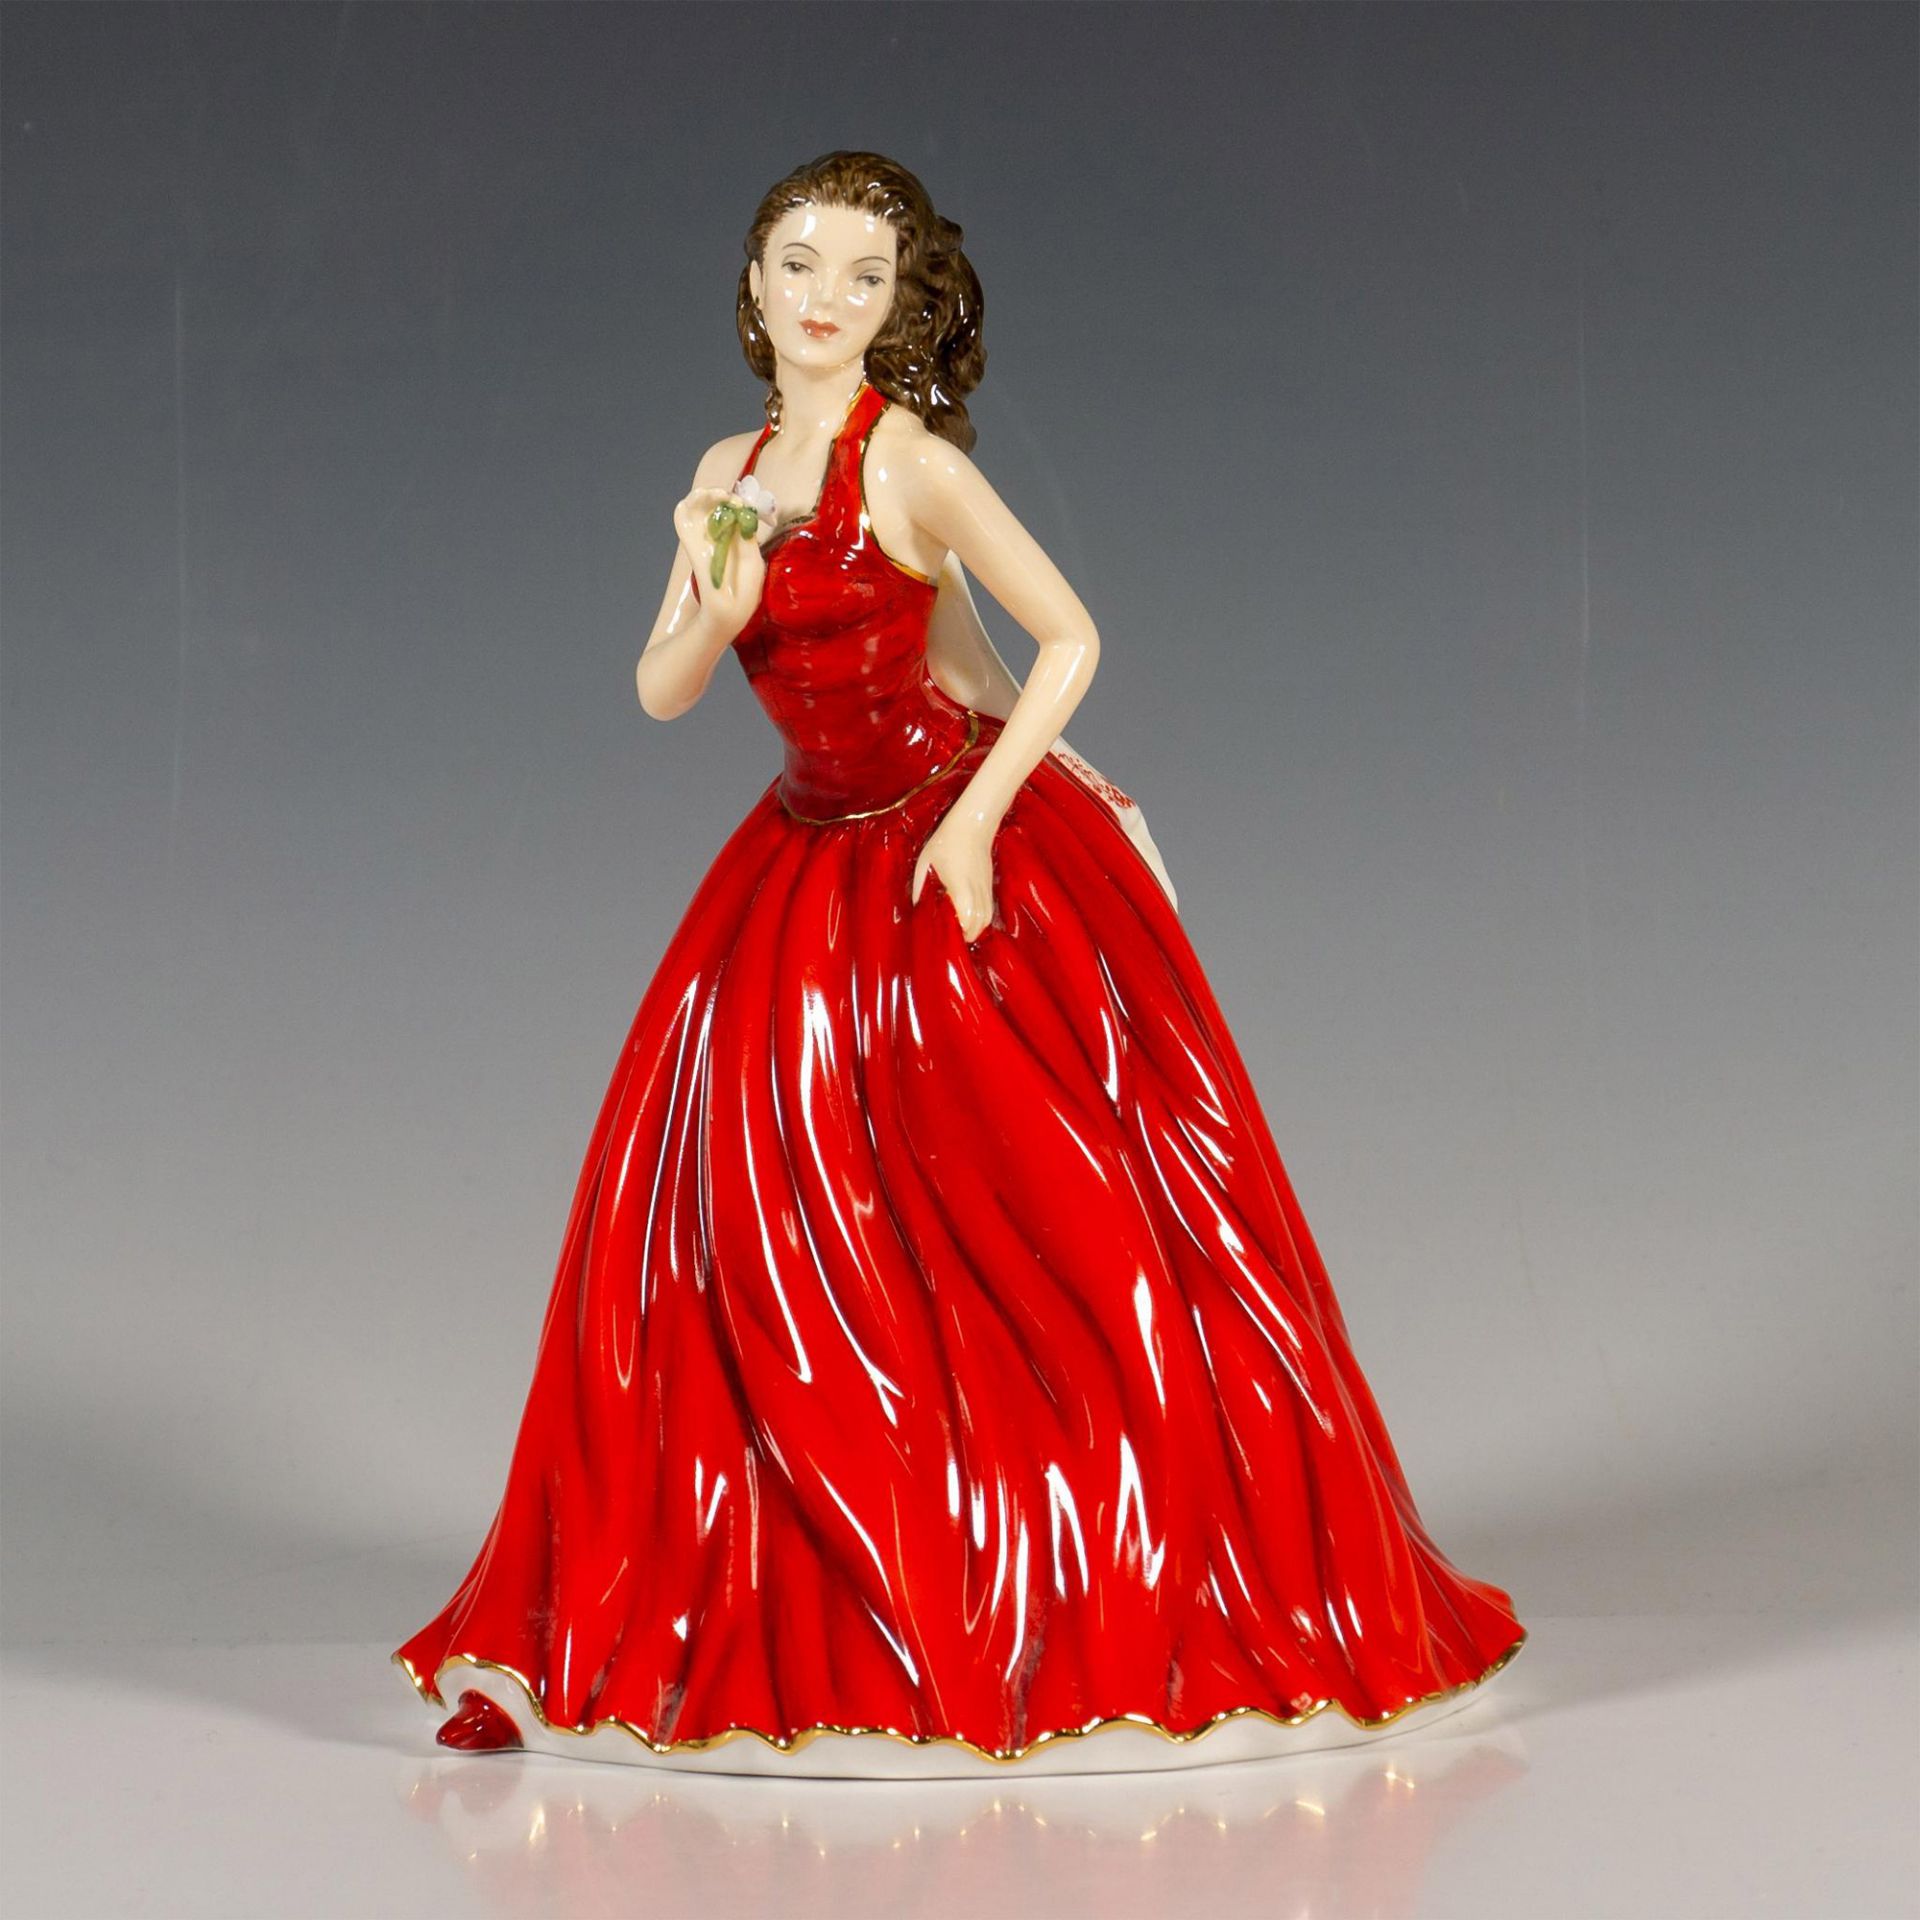 Ruby - HN5760 - Royal Doulton Figurine - Image 2 of 4